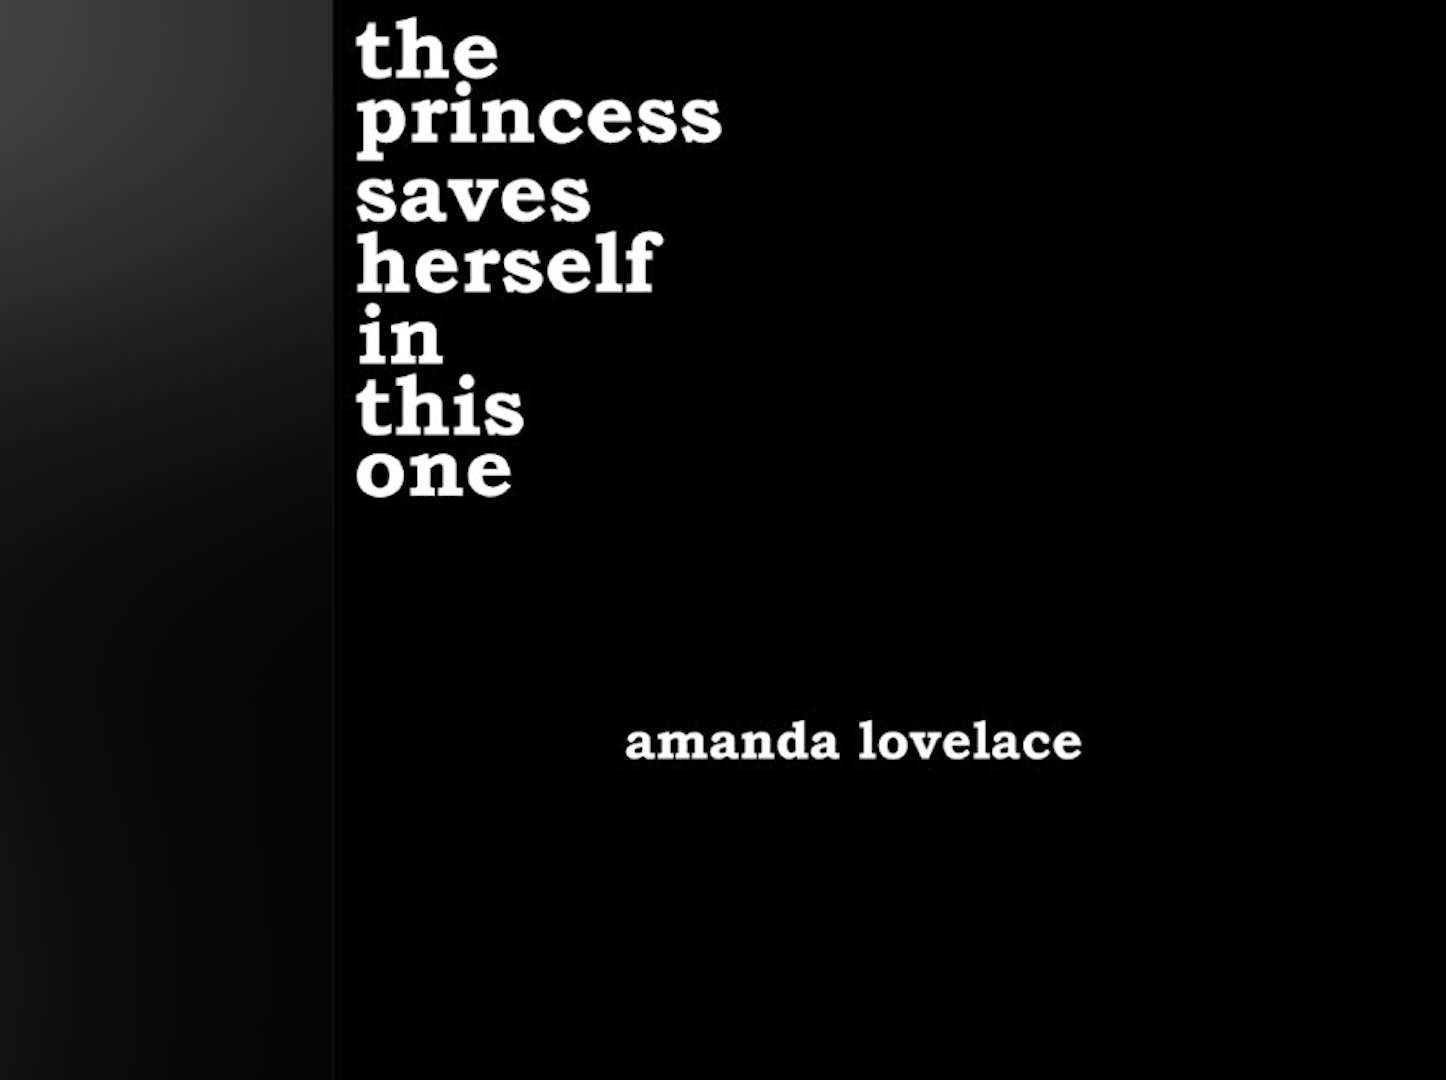 Cover of “The Princess Saves Herself in this One” by Amanda Lovelace